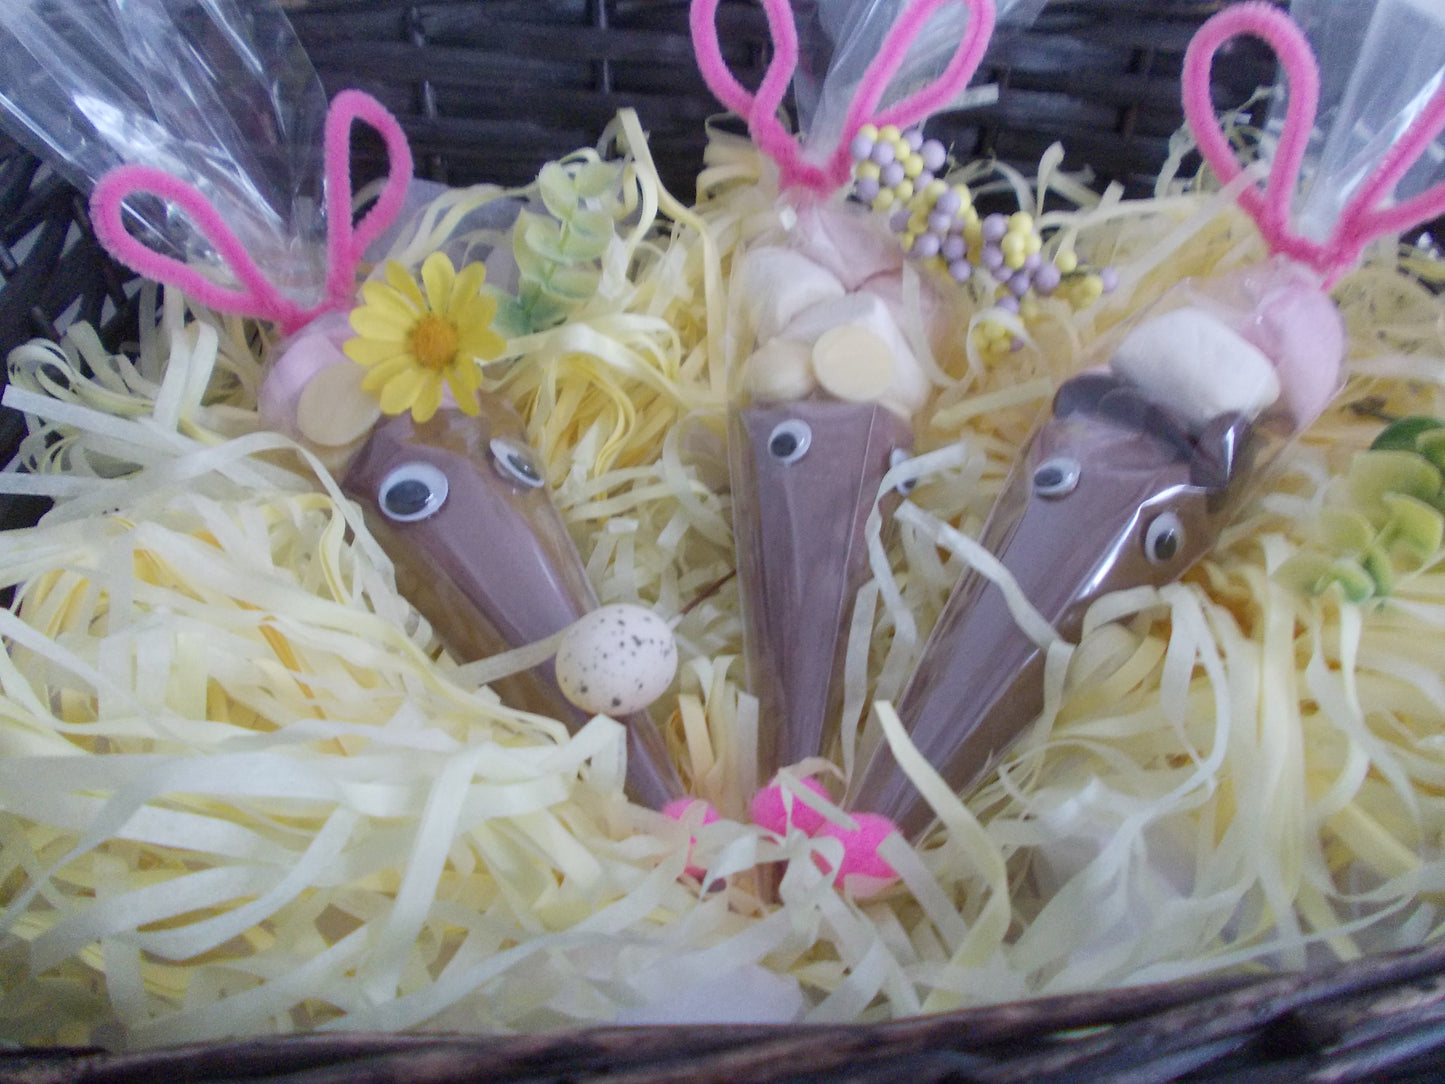 Vegan Easter Bunny 2 Hot Chocolate Cones Easter basket filler, Easter wedding or party favours for kids, dairy free chocolate gift